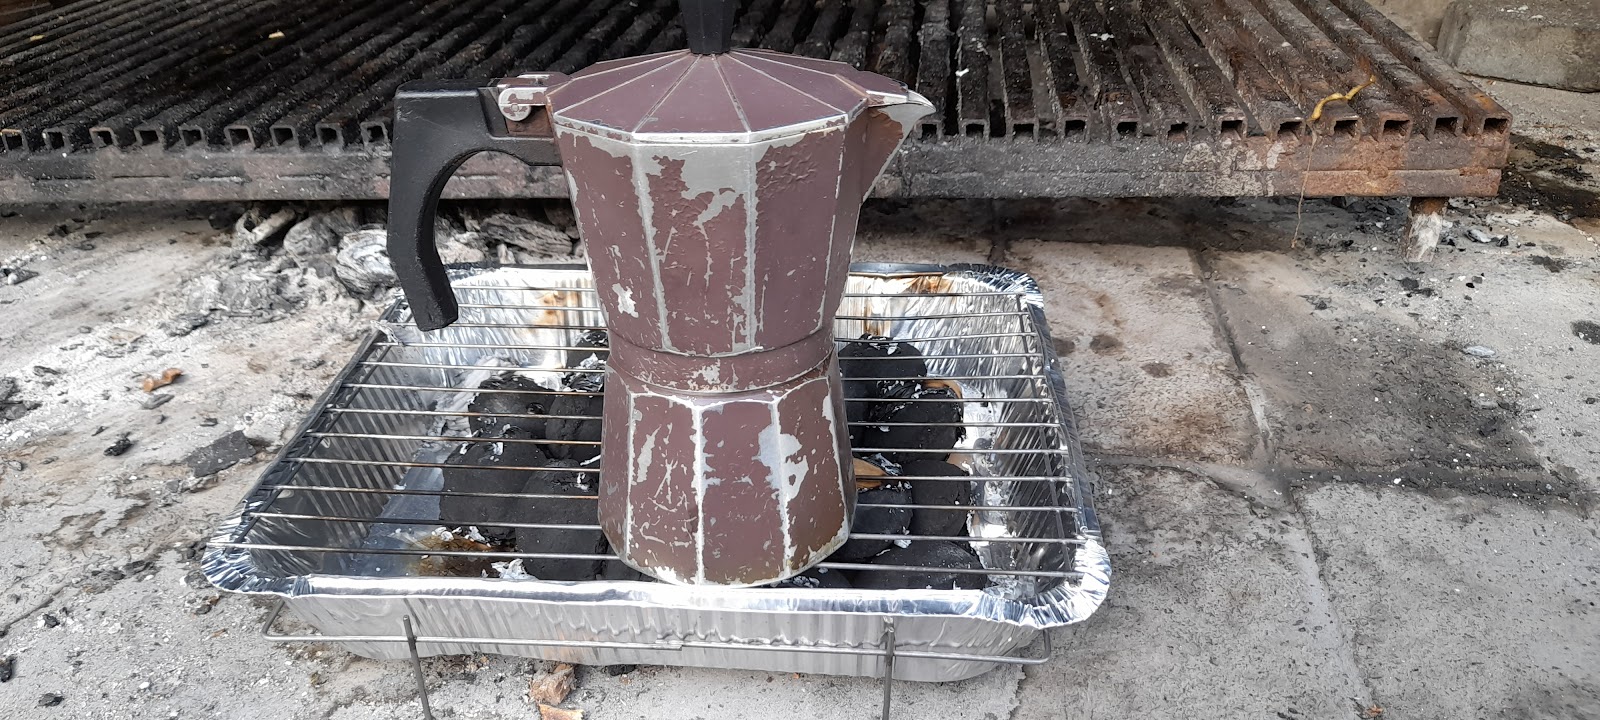 Percolator and instant grill